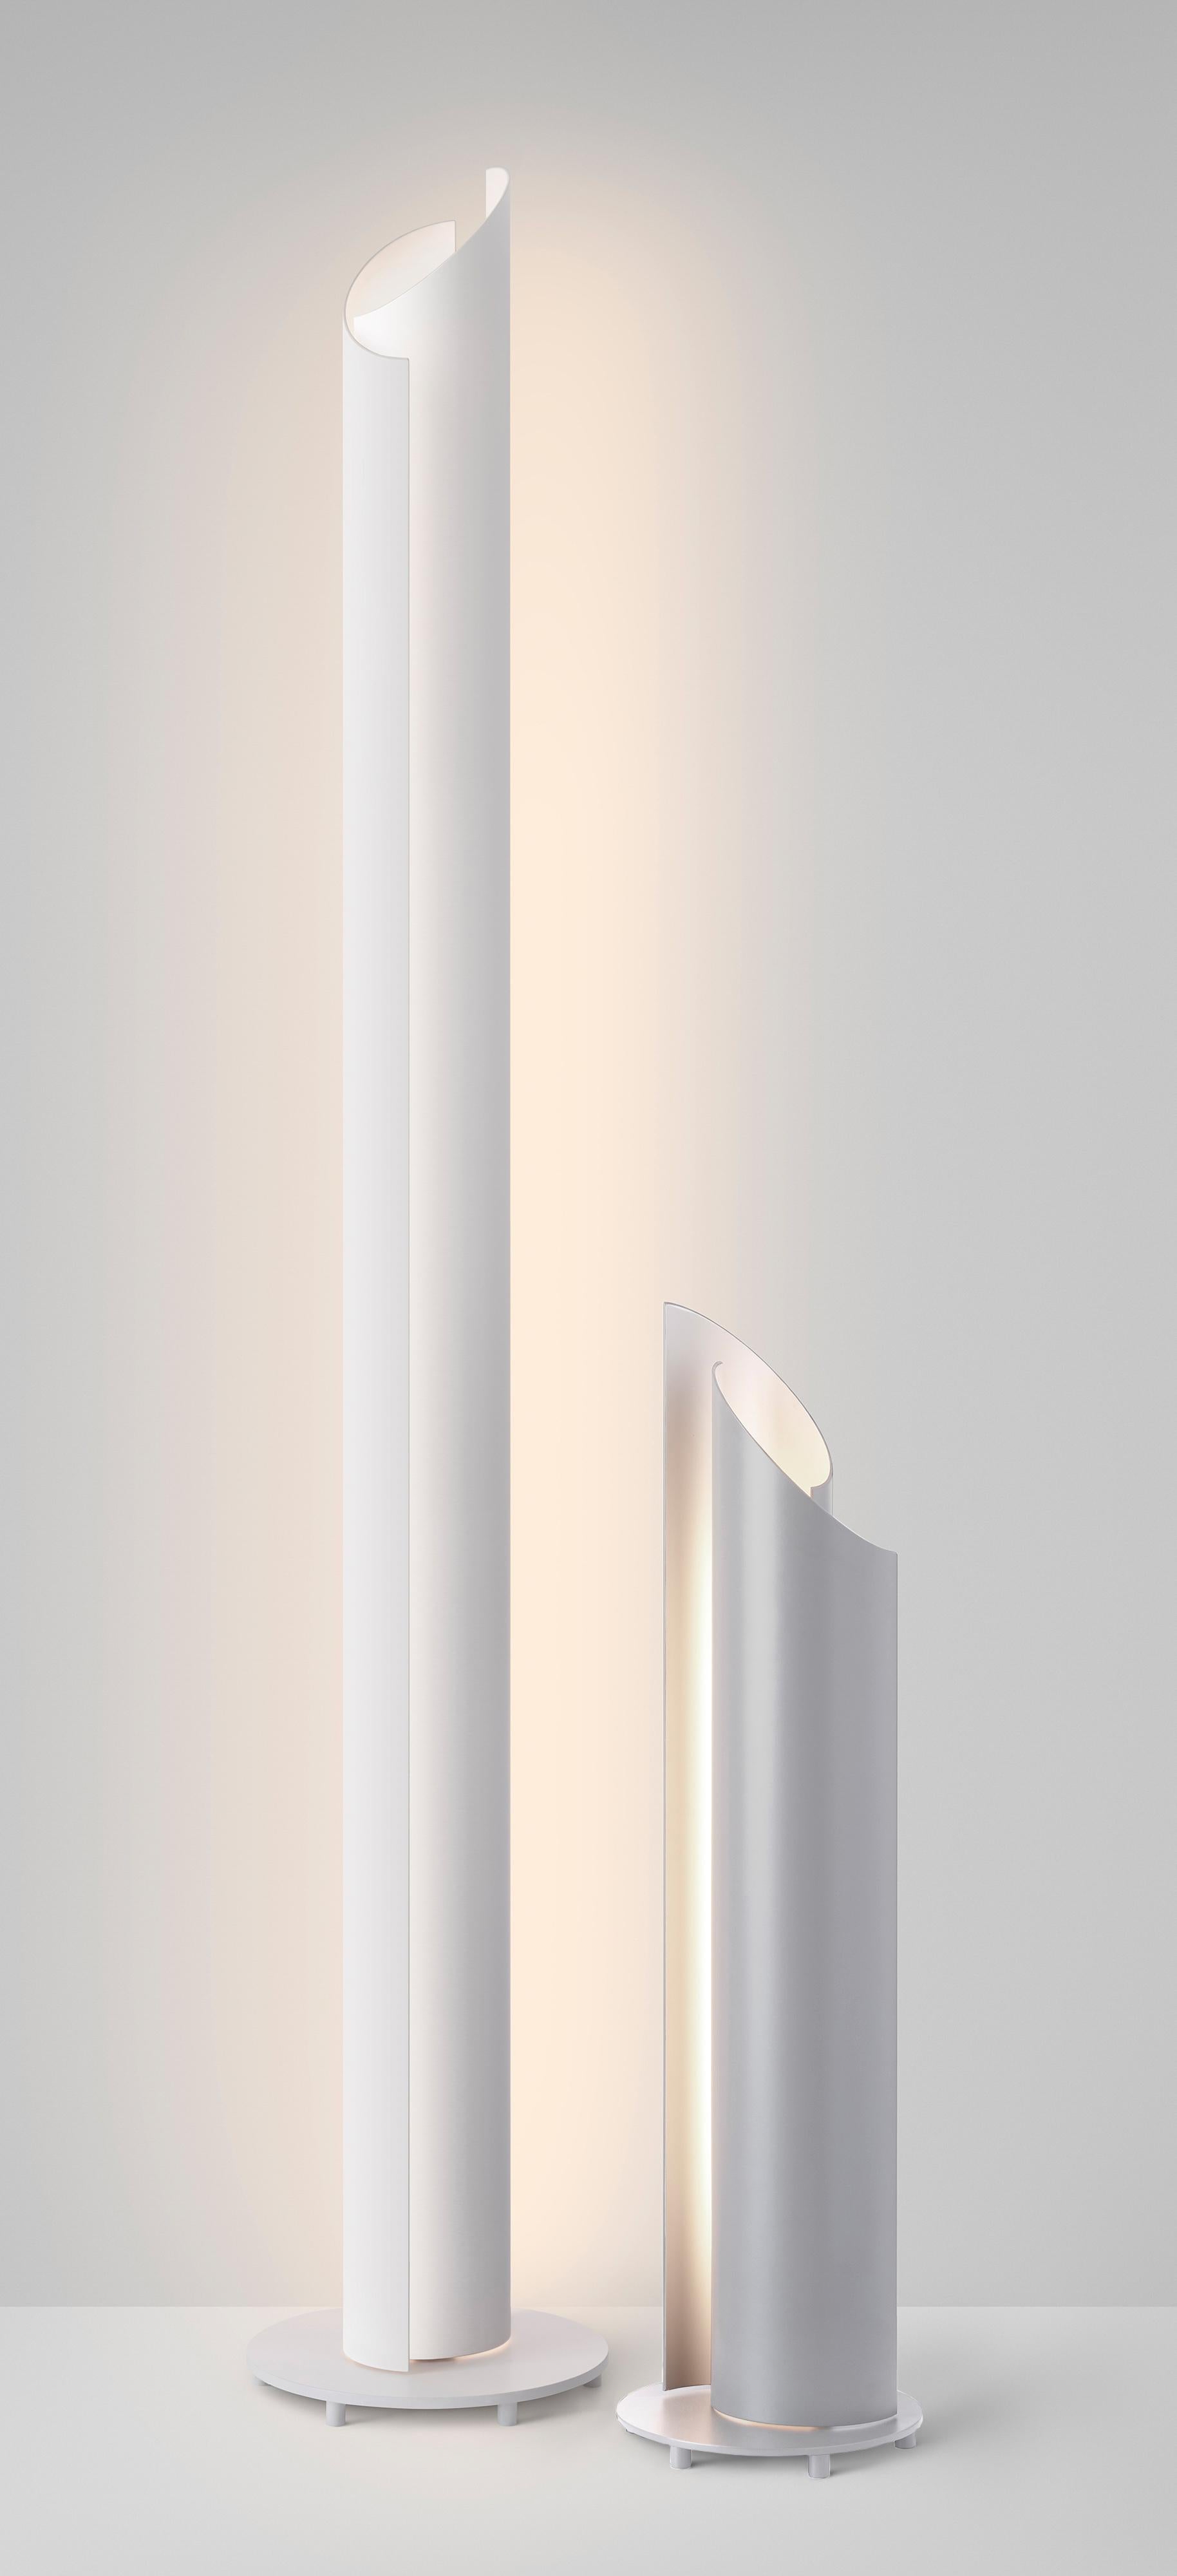 The new Vella series is a dynamic family of luminaires designed to be completely adjustable via two independently swiveling louvers, inviting the user to sculpt light and shadow. Vella’s sweeping curved aluminum form subtly captures and releases